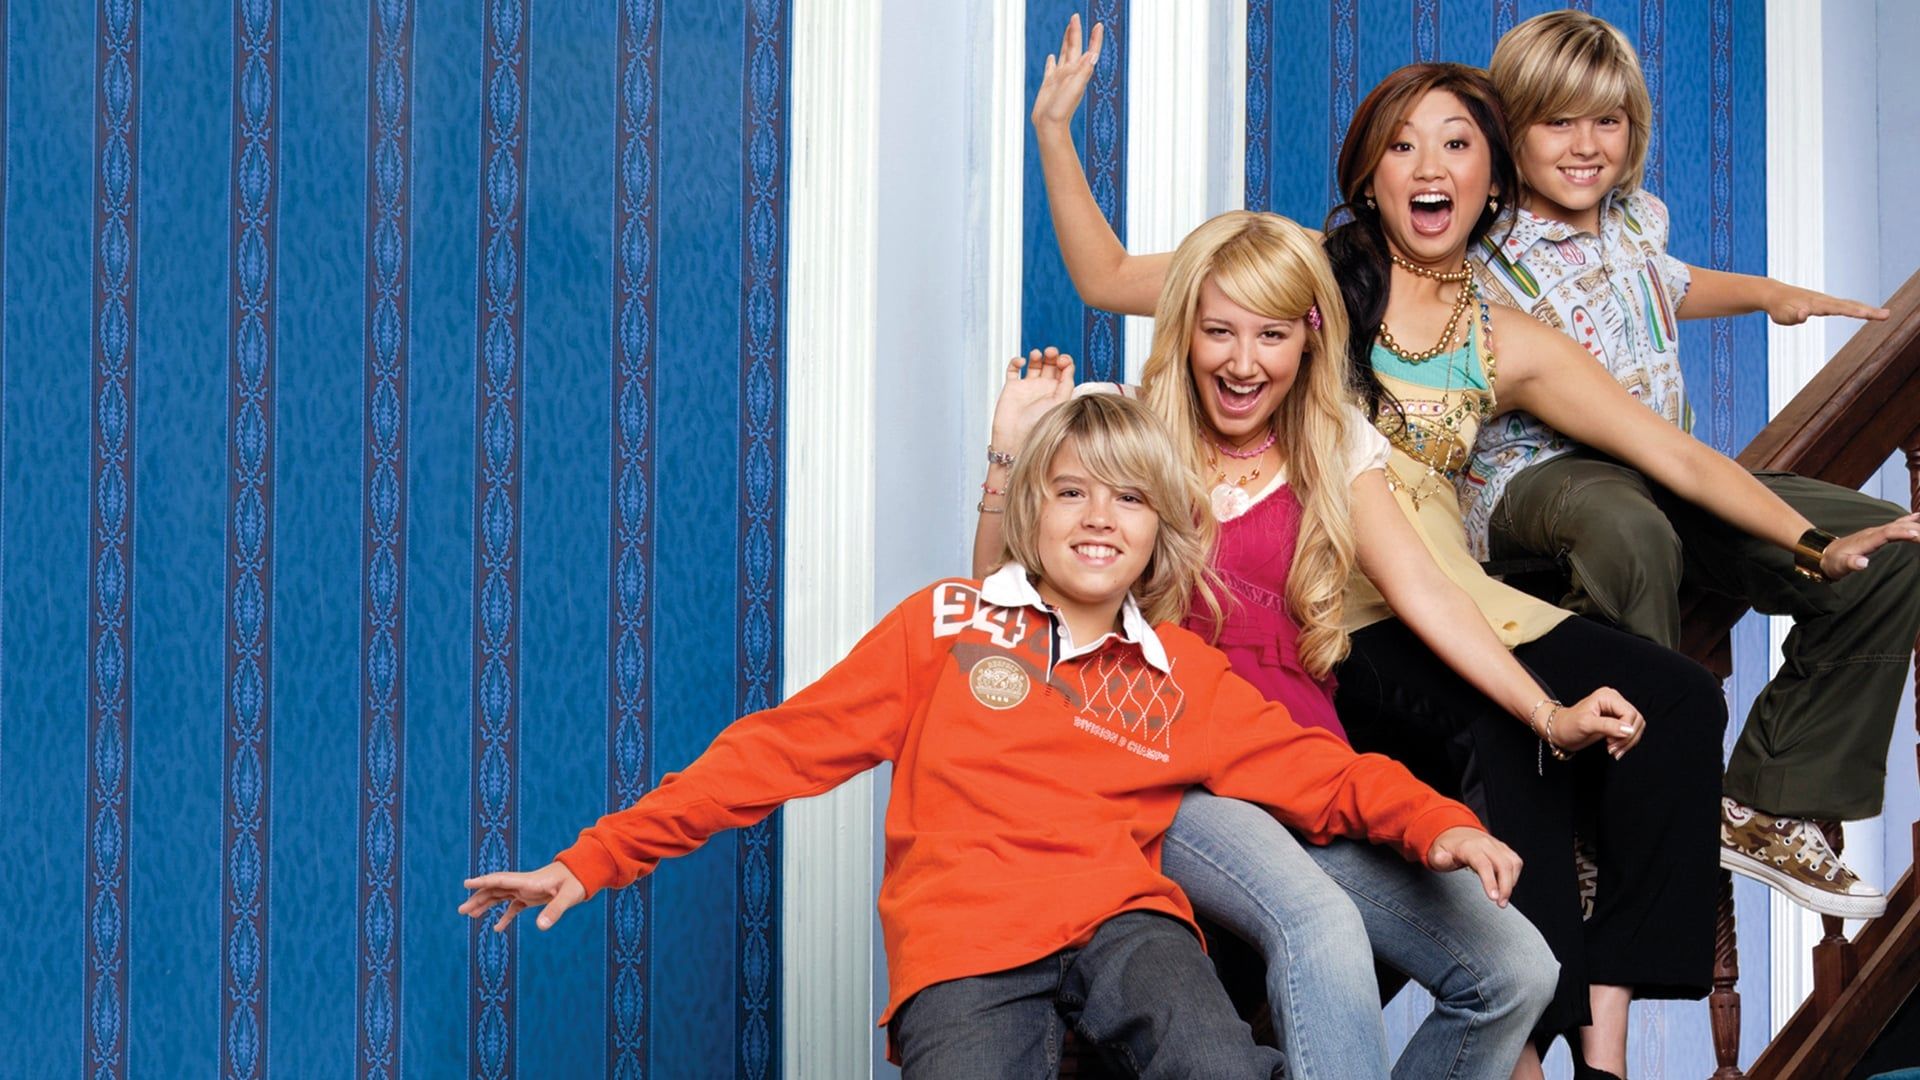 The Suite Life of Zack & Cody Backdrop